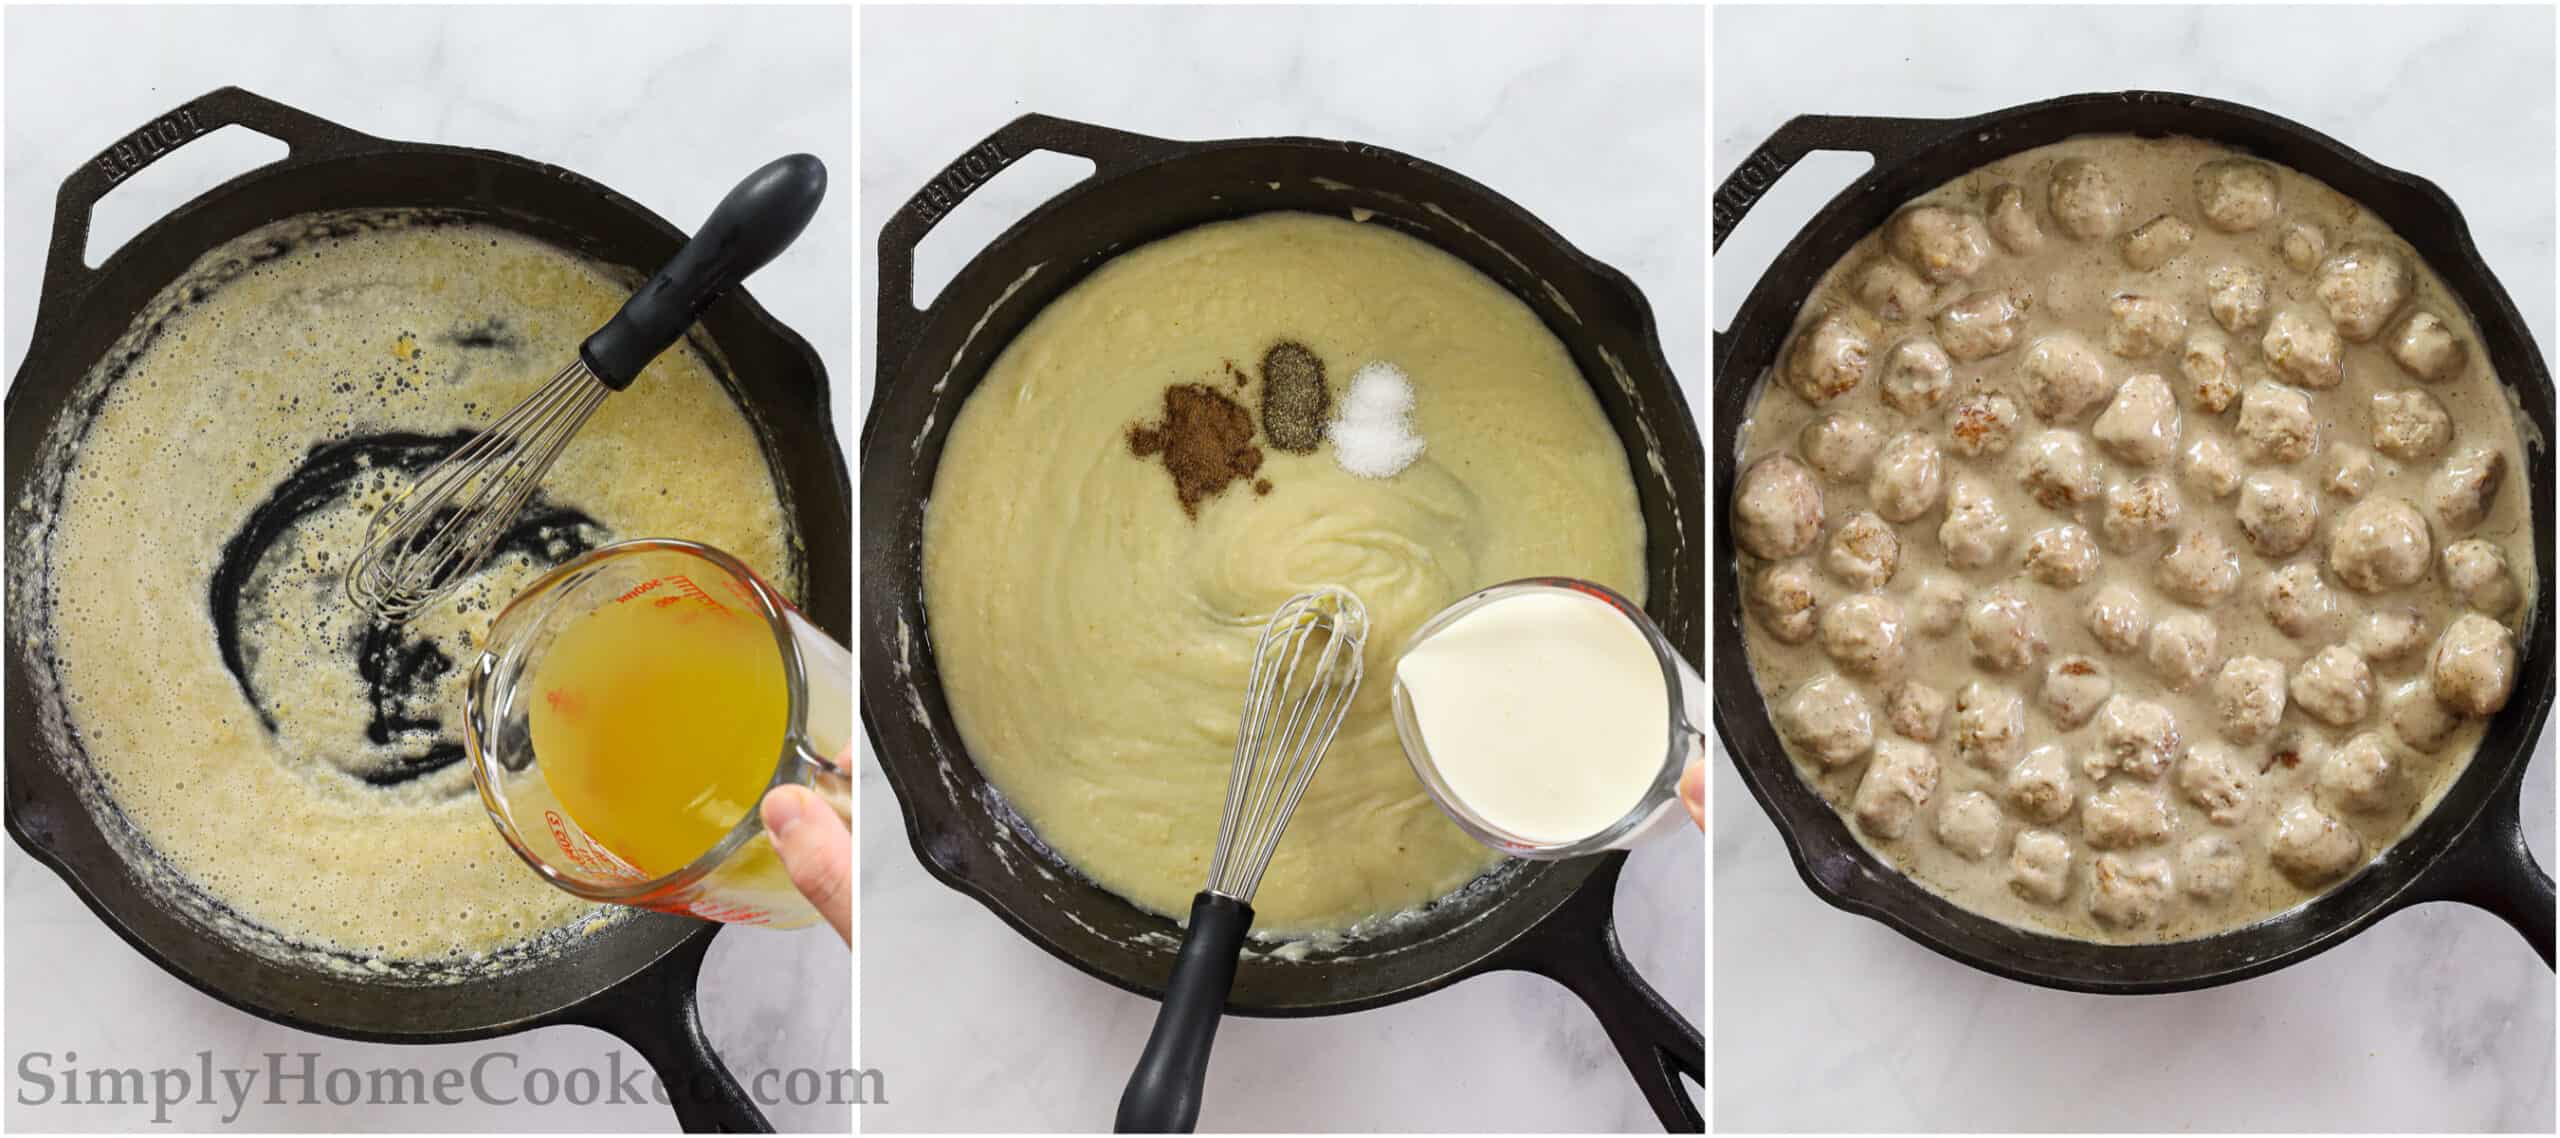 Steps to making the Perfect Swedish Meatballs, including adding the sauce ingredients to the roux and whisking them together and then adding in the cooked meatballs.